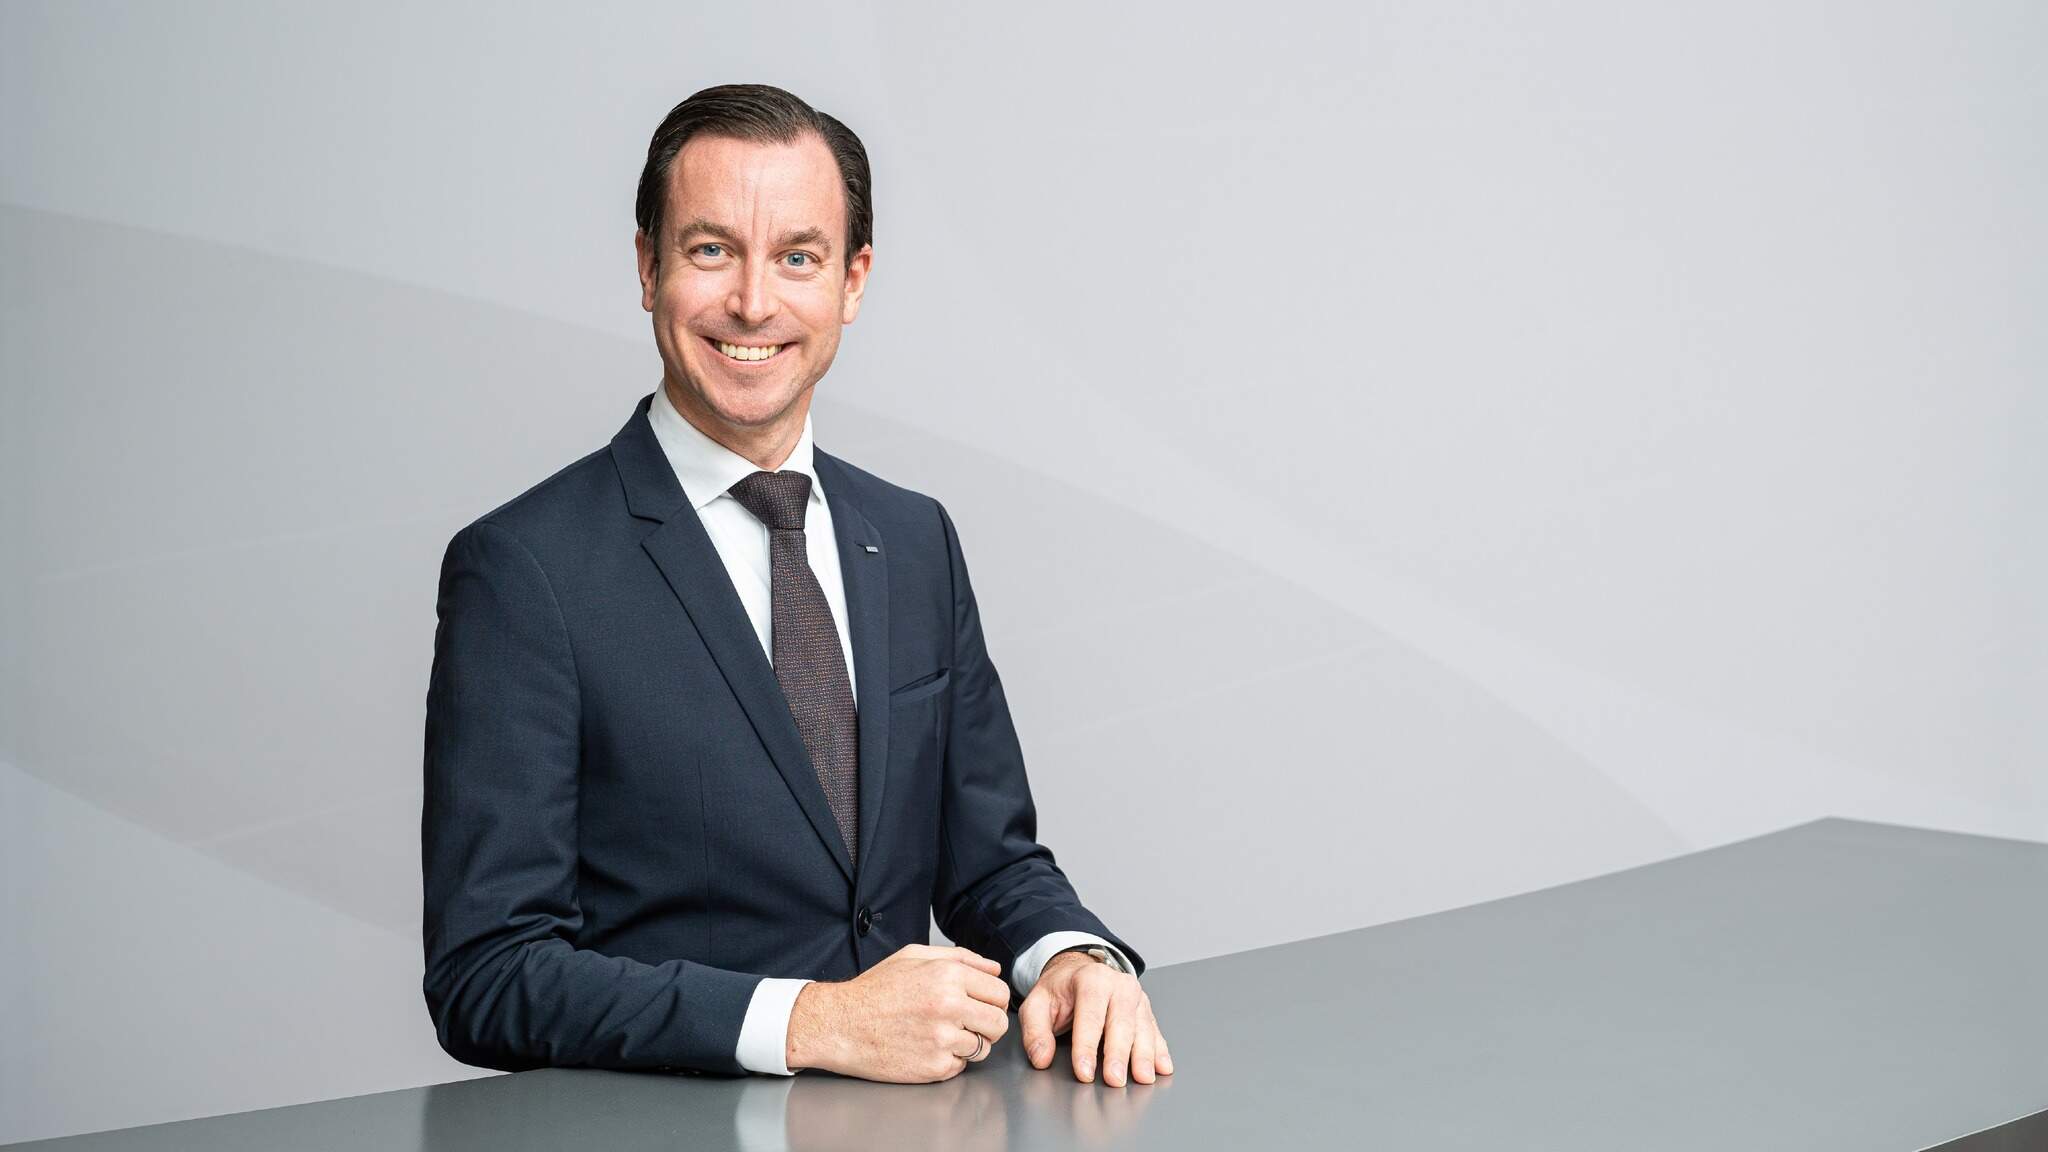 Since the turn of the year, Dr. Tobias Burger (46) has been the new Chief Operations Officer (COO) Air & Sea Logistics and a member of the Executive Board at DACHSER.